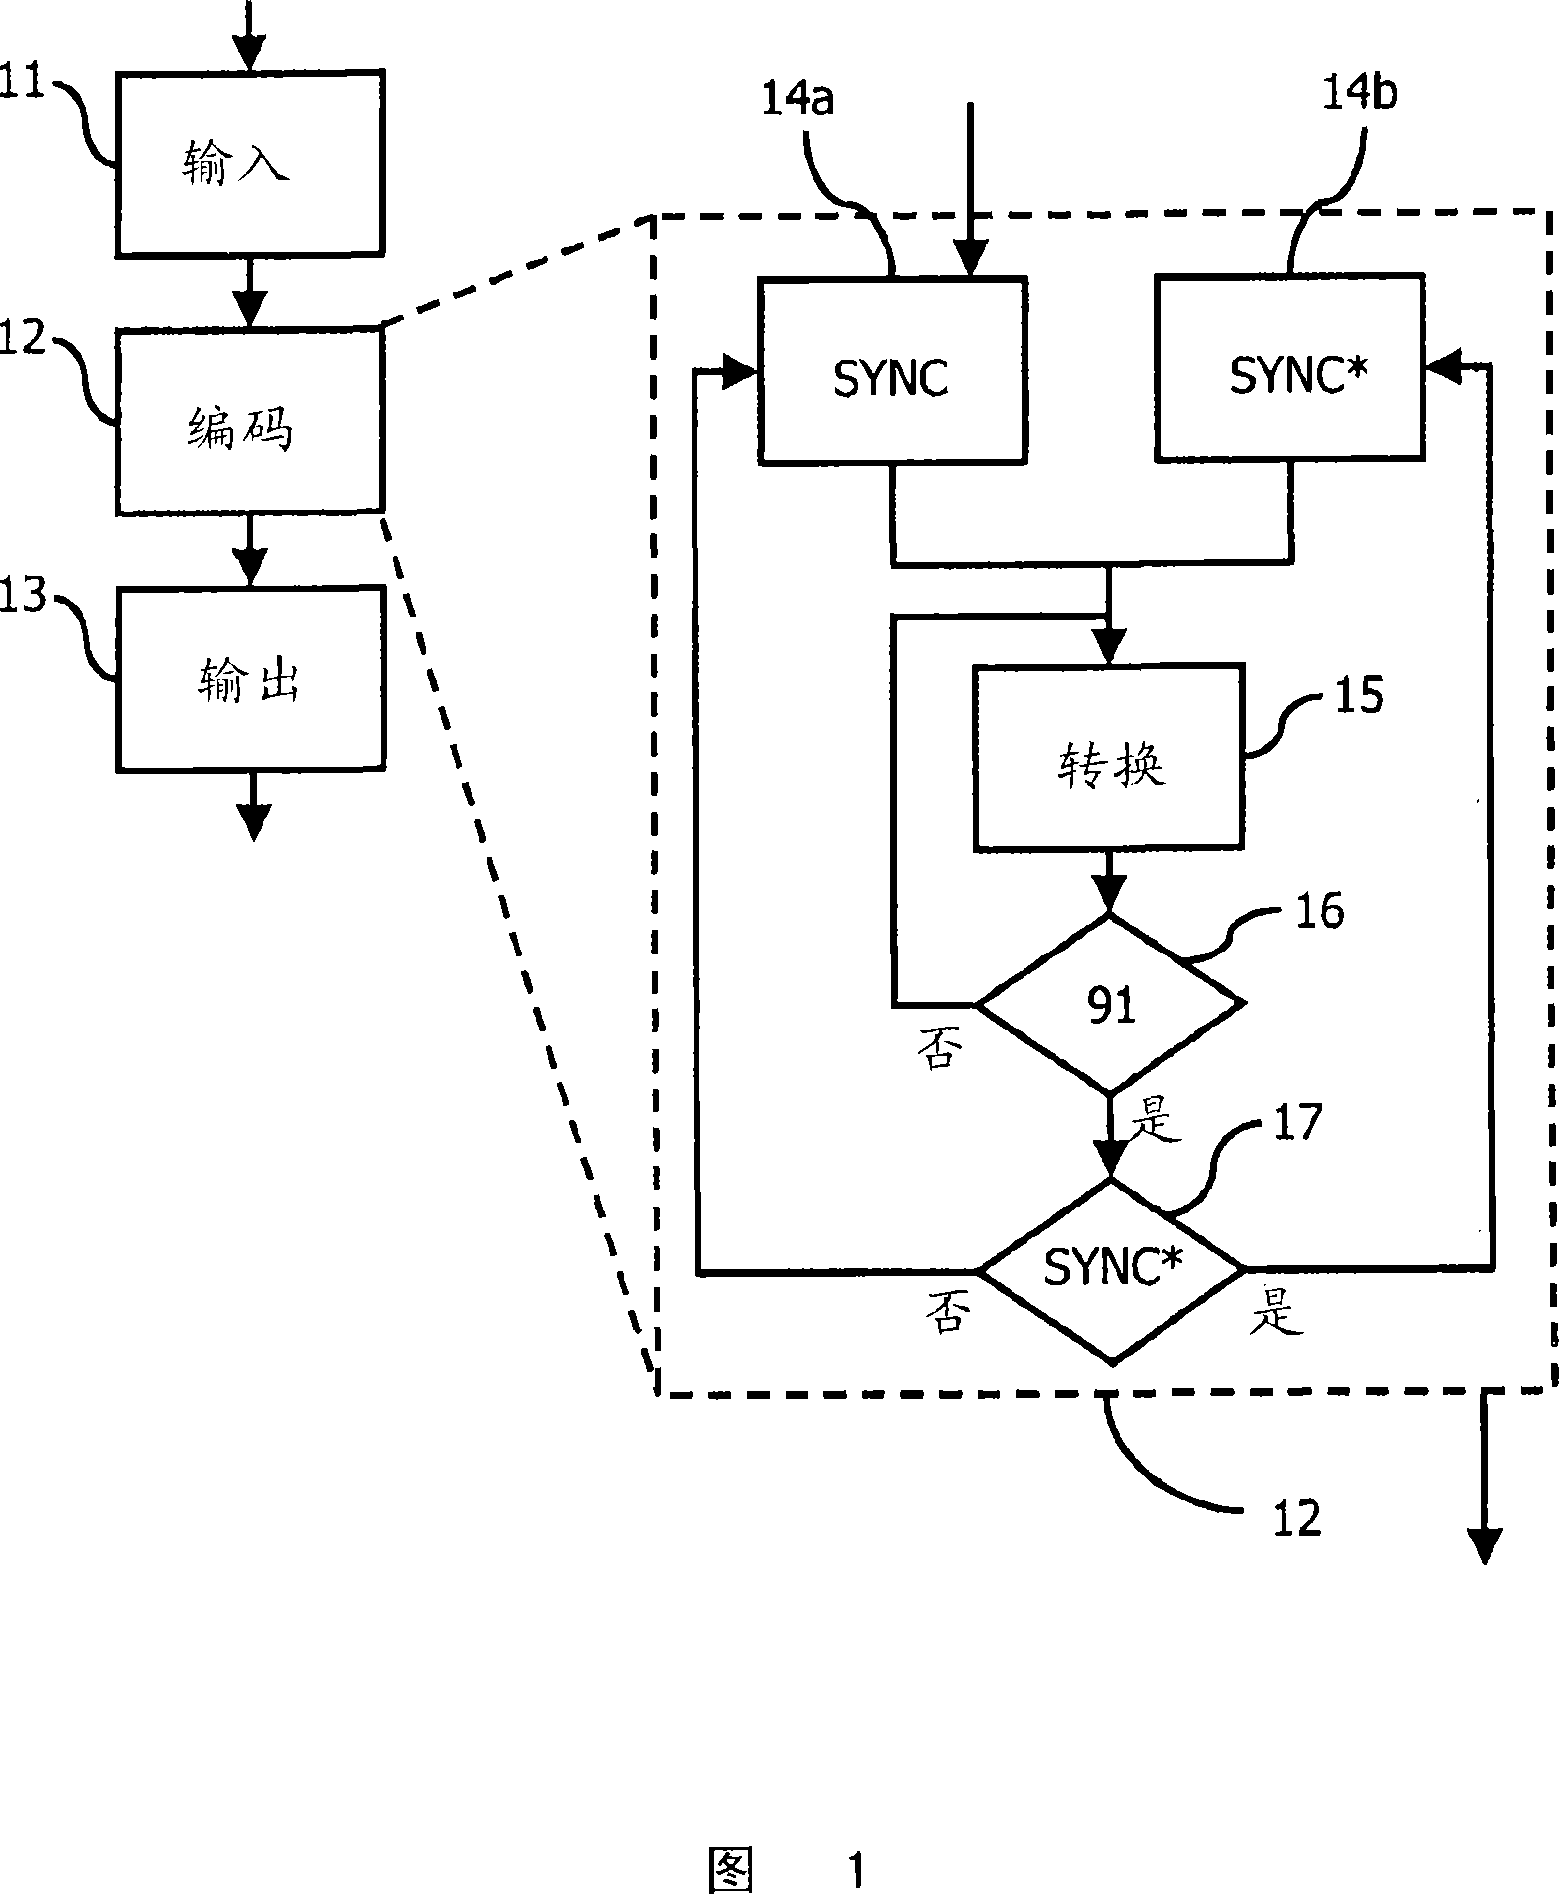 Method for providing an output signal for storing of user data on a data carrier